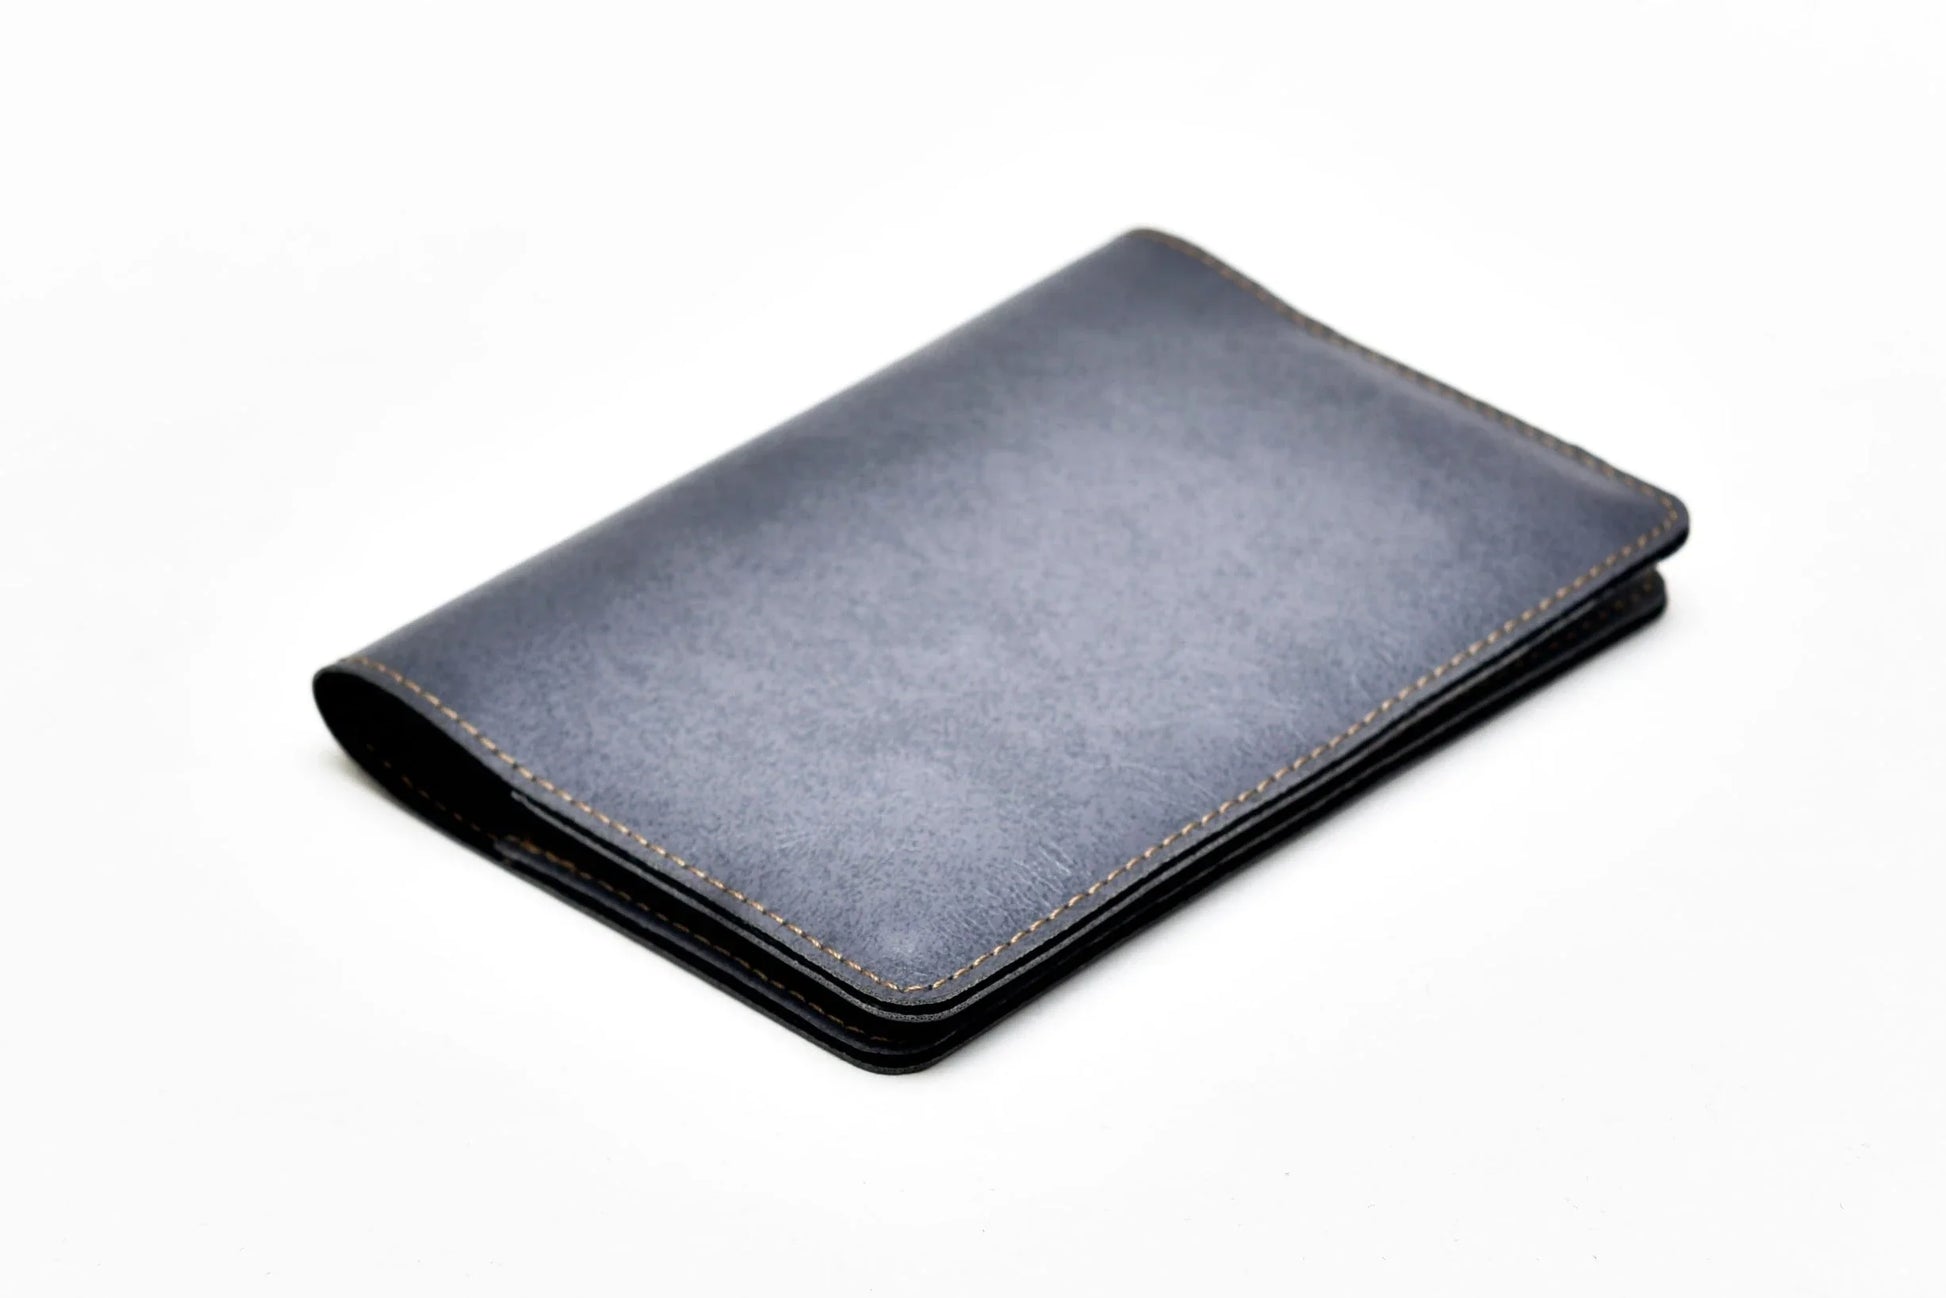 Carry your passport in a personalized leather case that reflects your impeccable taste and attention to detail.